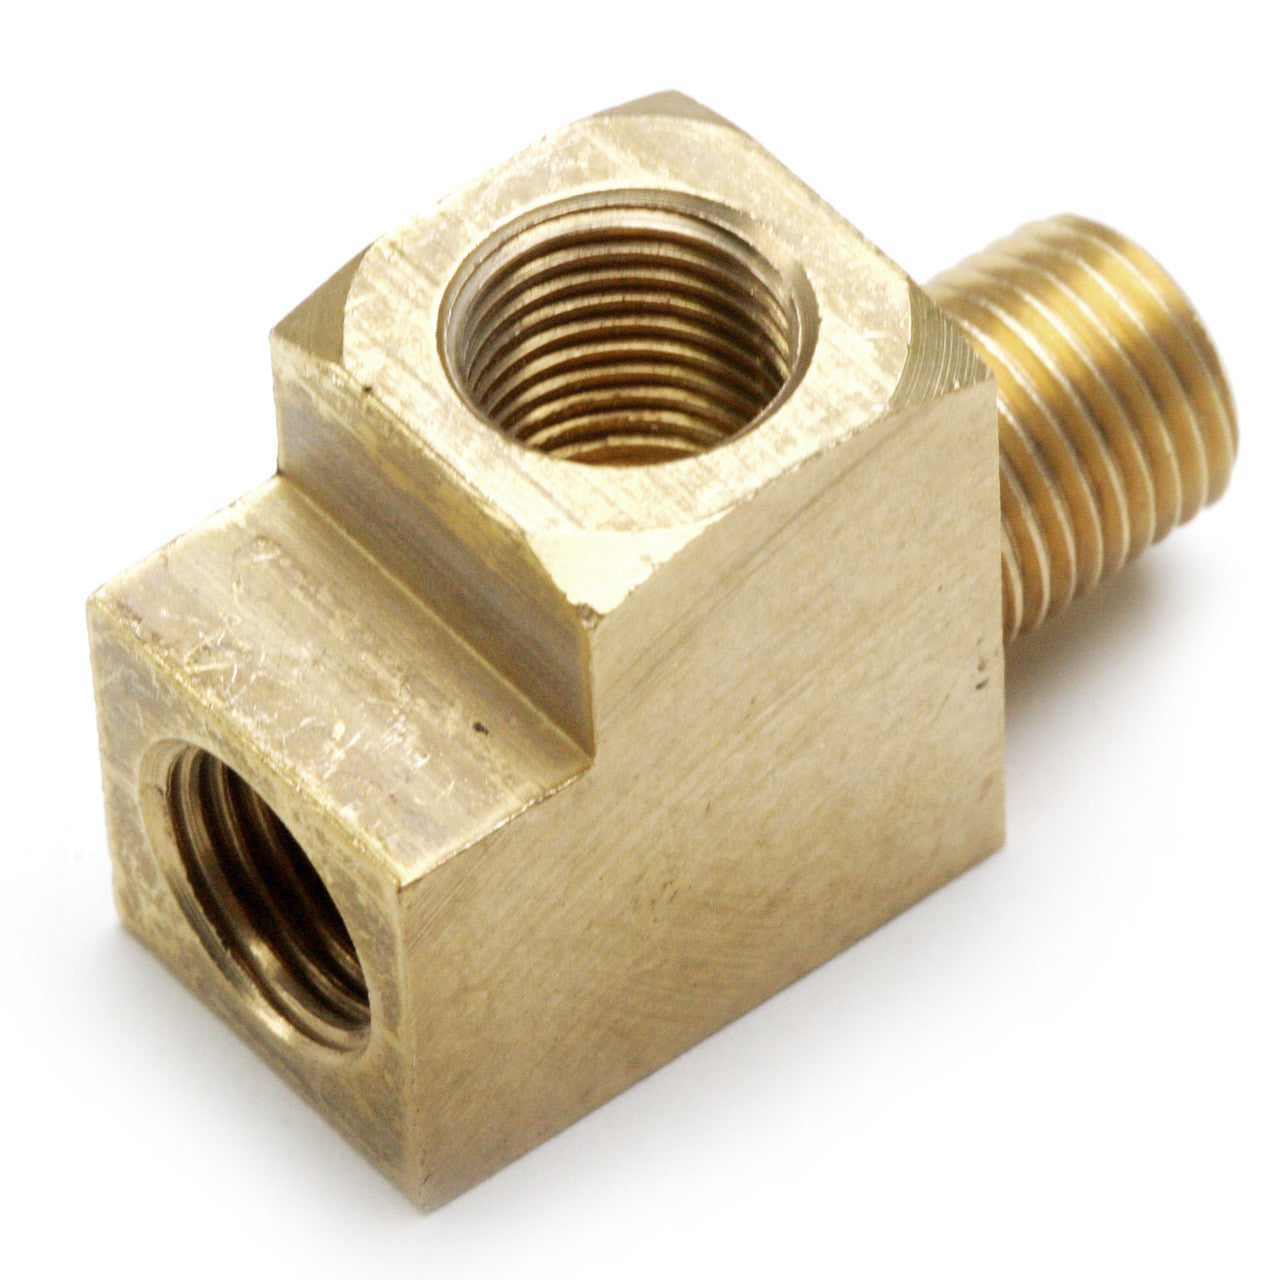 Empi 9205 Brass T Fitting For Gauges, Male 1/8" NPT X 2 Female 10mmx1.0, Each